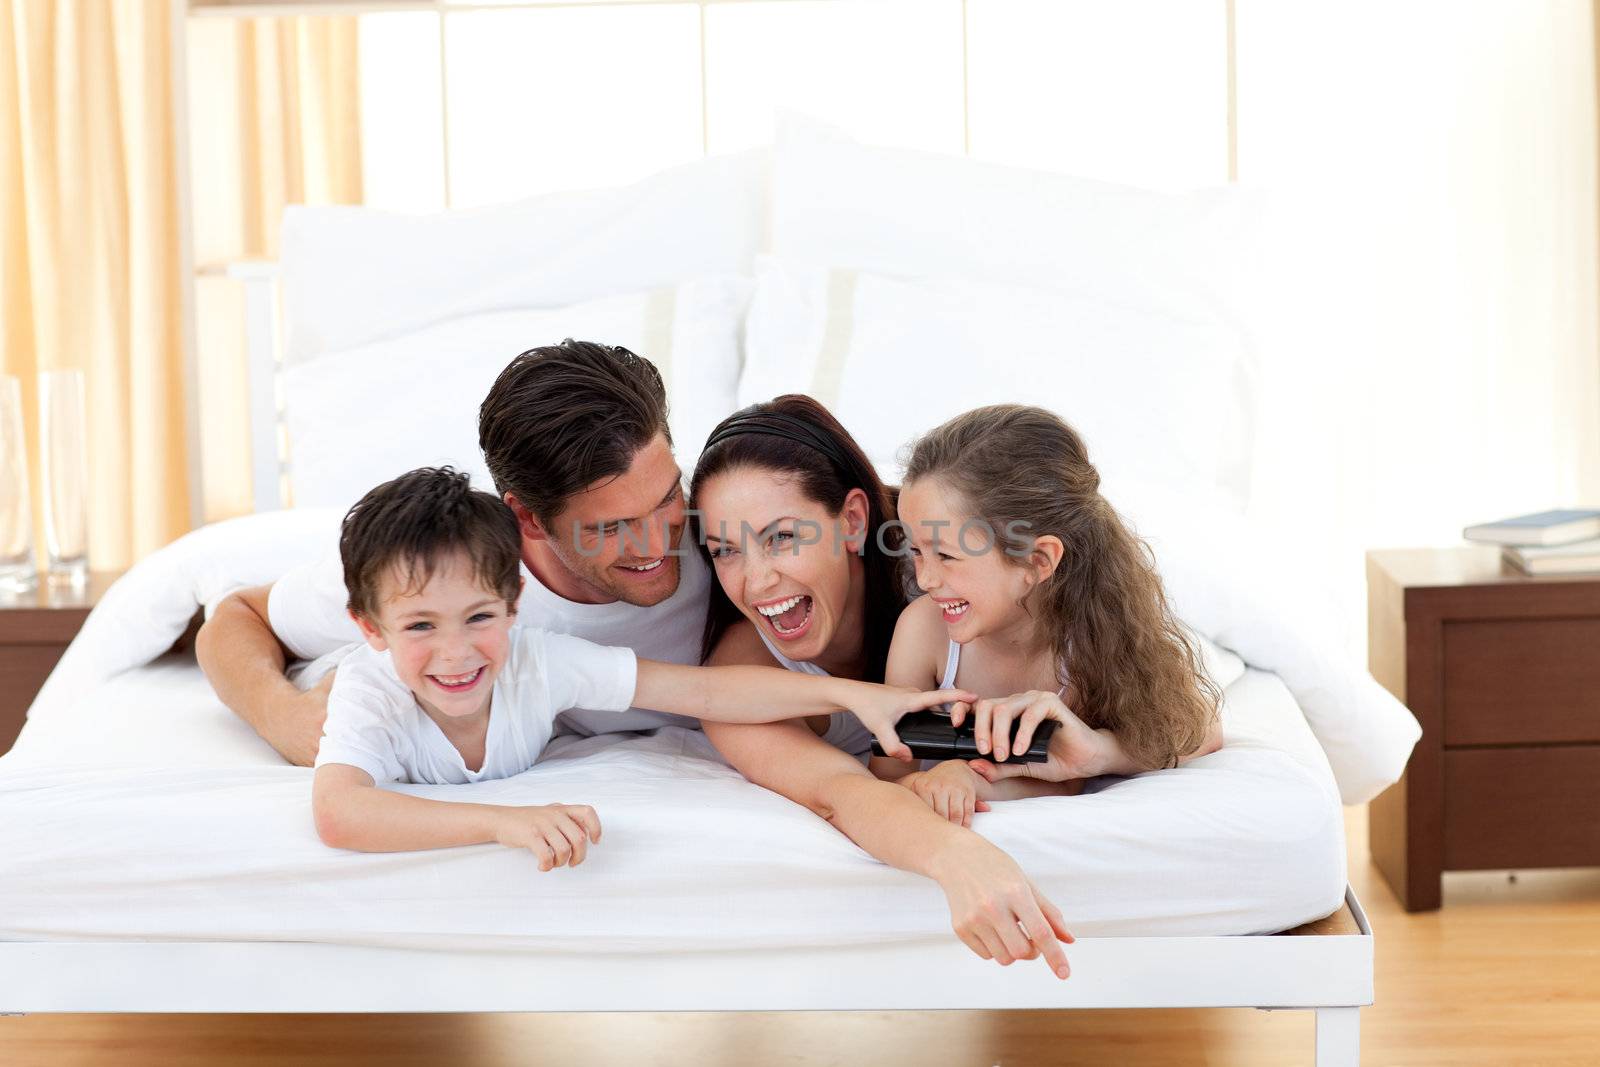 Siblings with their parents having fun lying on the bed